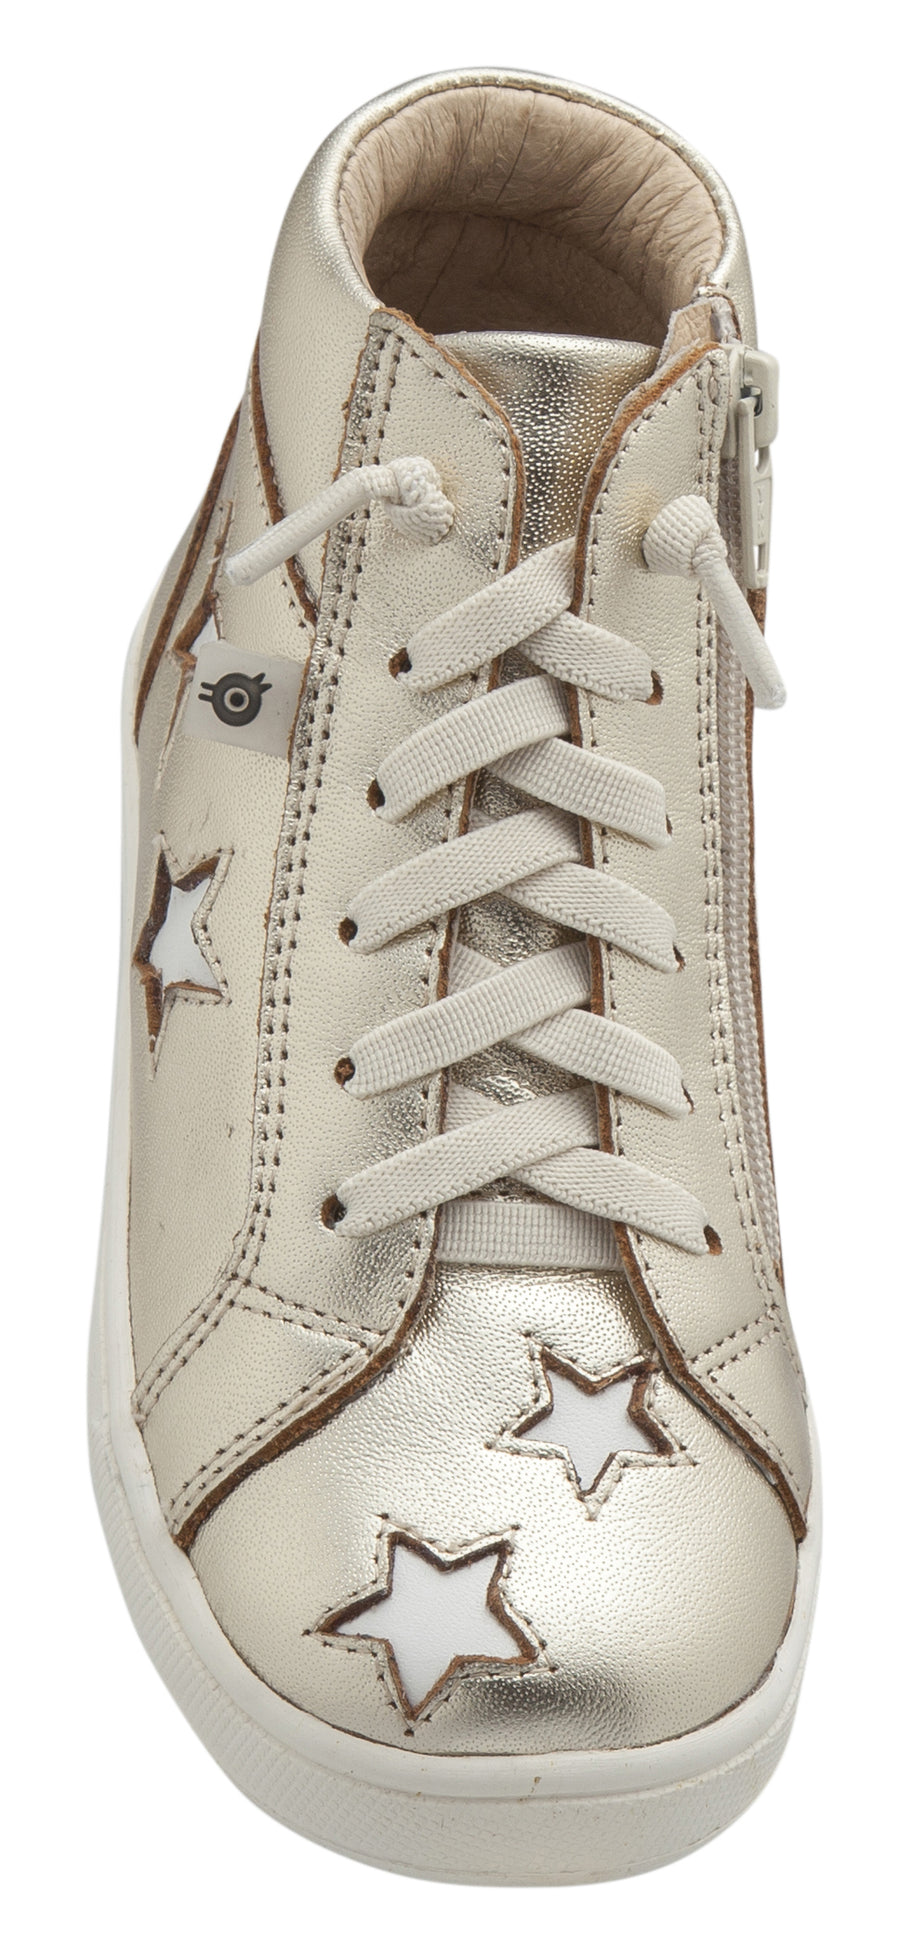 Old Soles Girl's and Boy's Starey High Top Sneaker, Gold/Snow